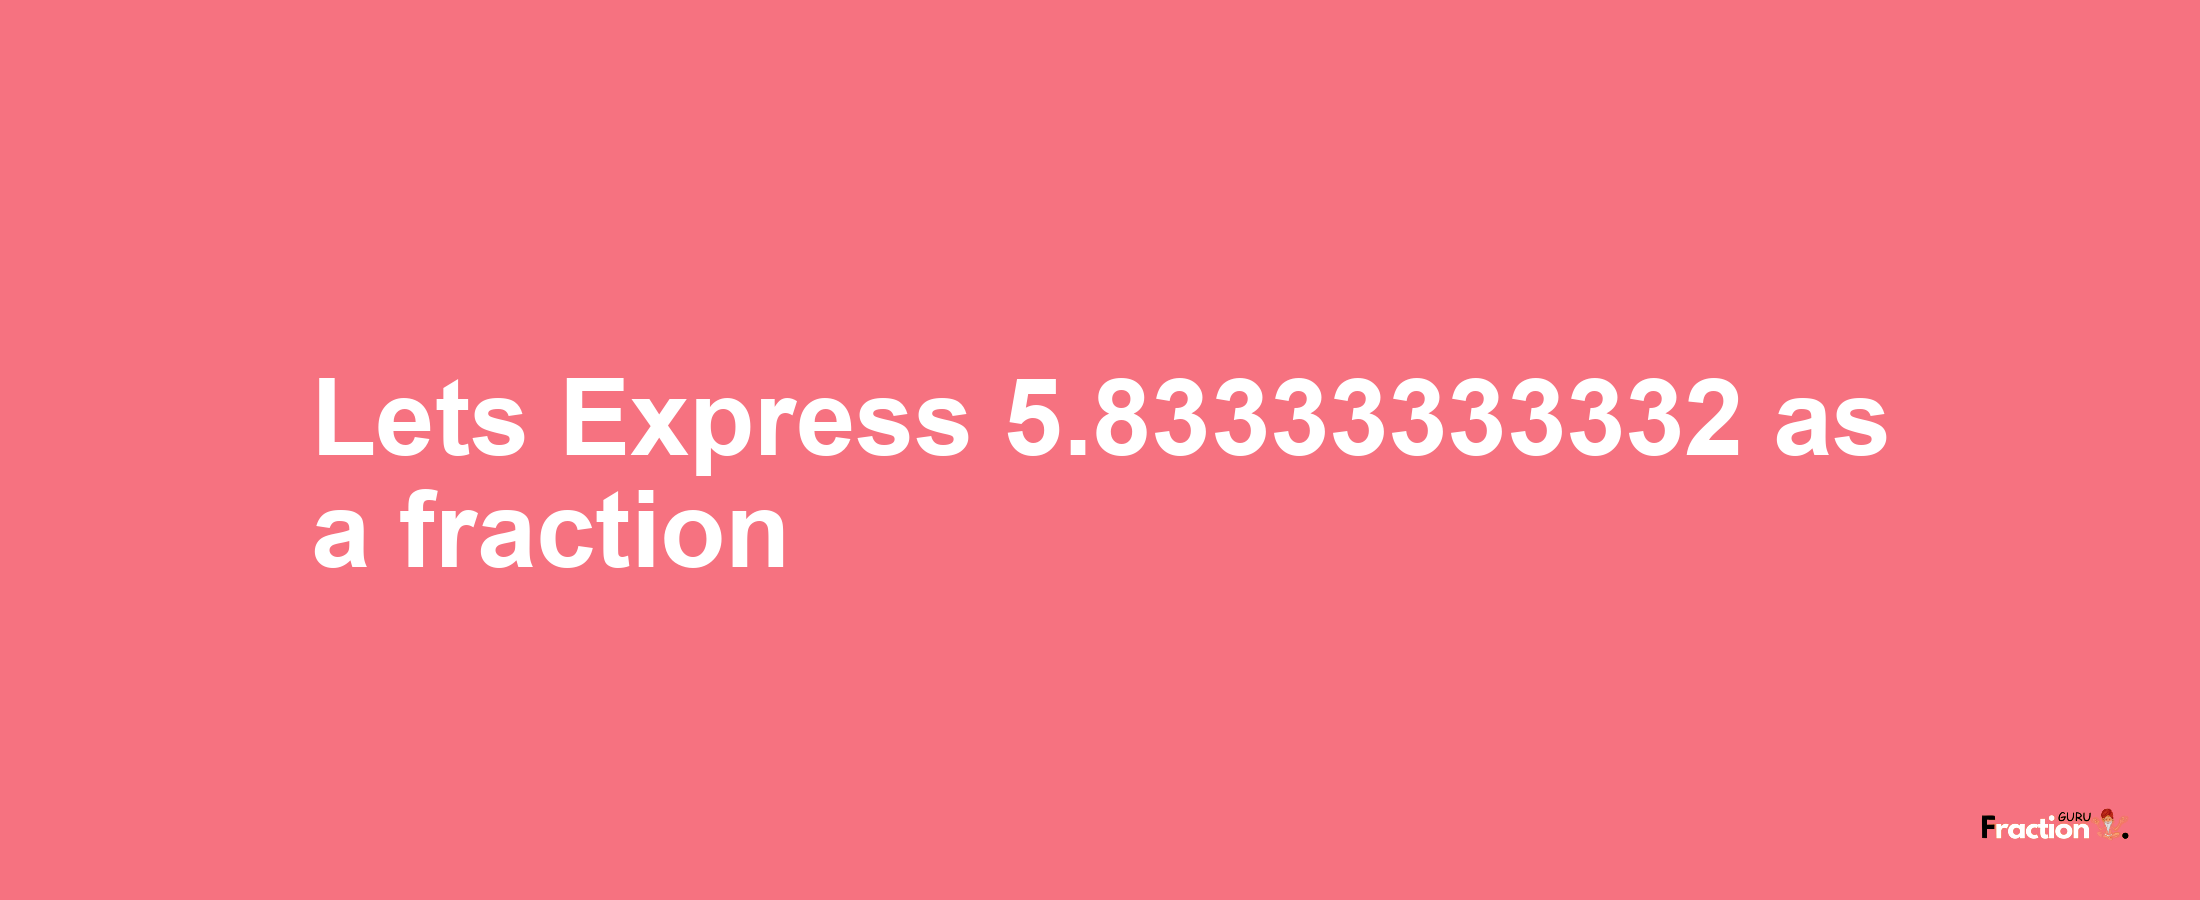 Lets Express 5.83333333332 as afraction